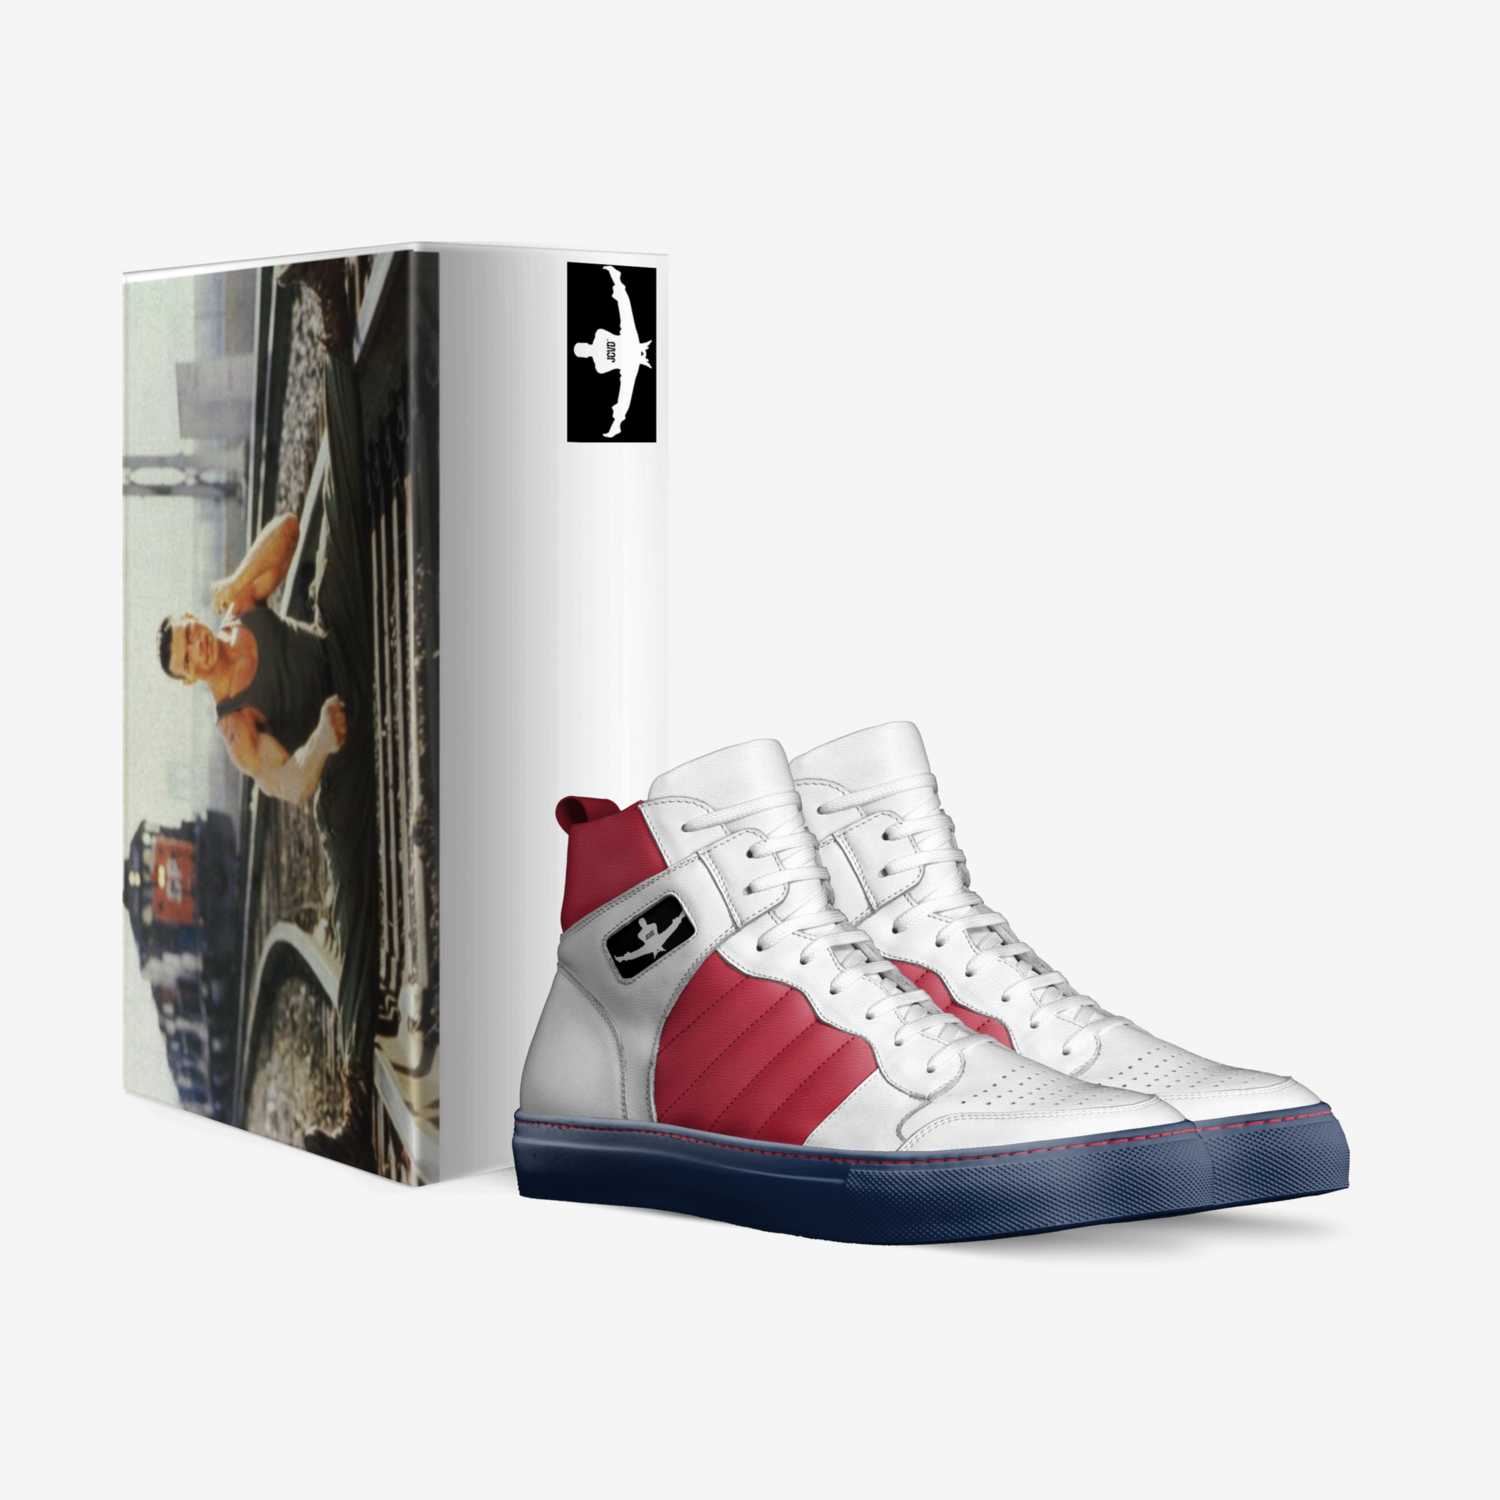 JCVD custom made in Italy shoes by Kevin | Box view